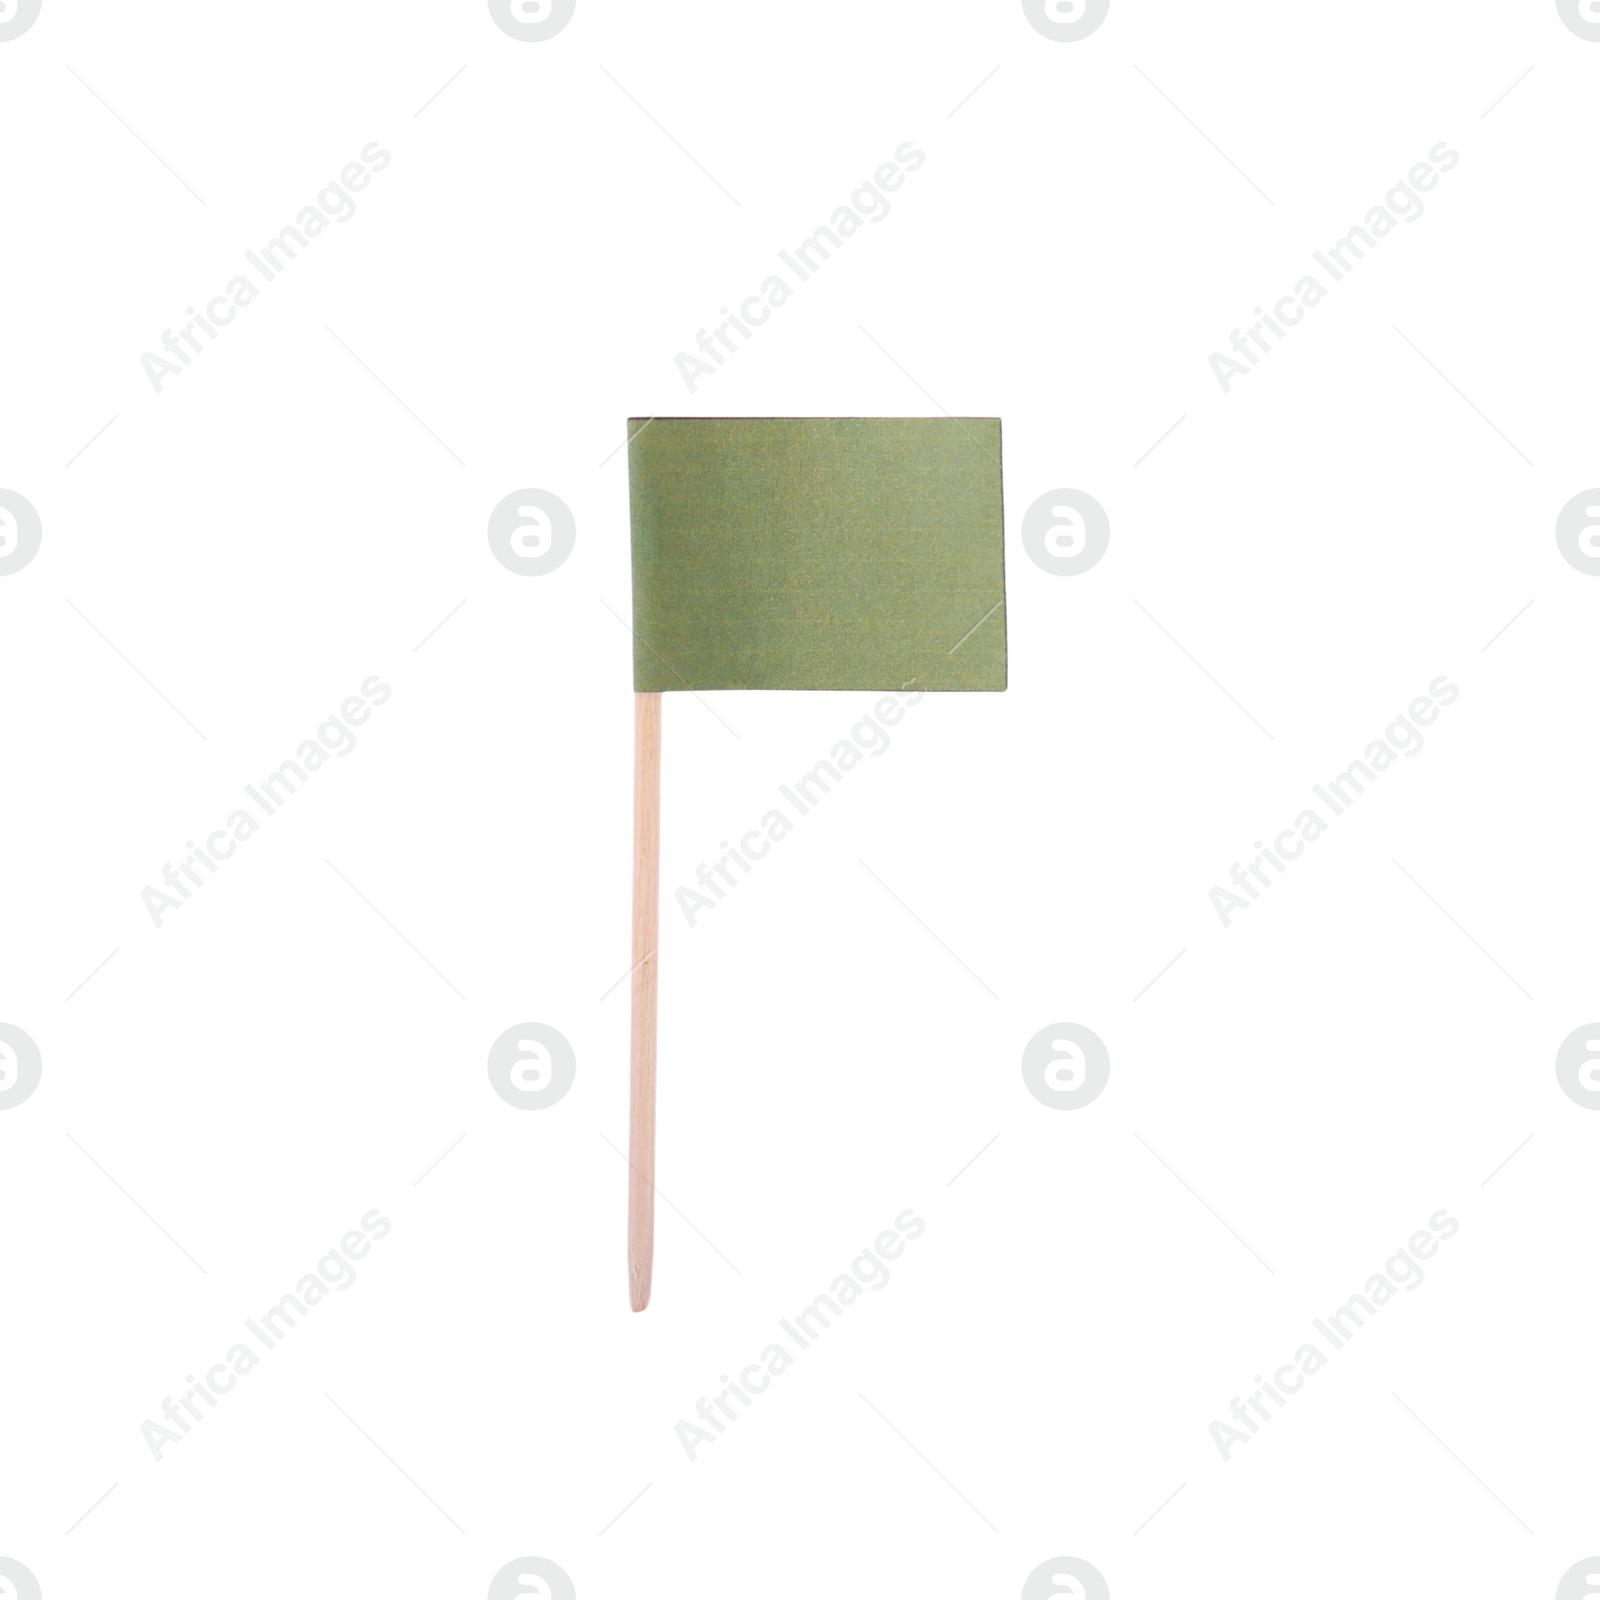 Photo of Small olive paper flag isolated on white